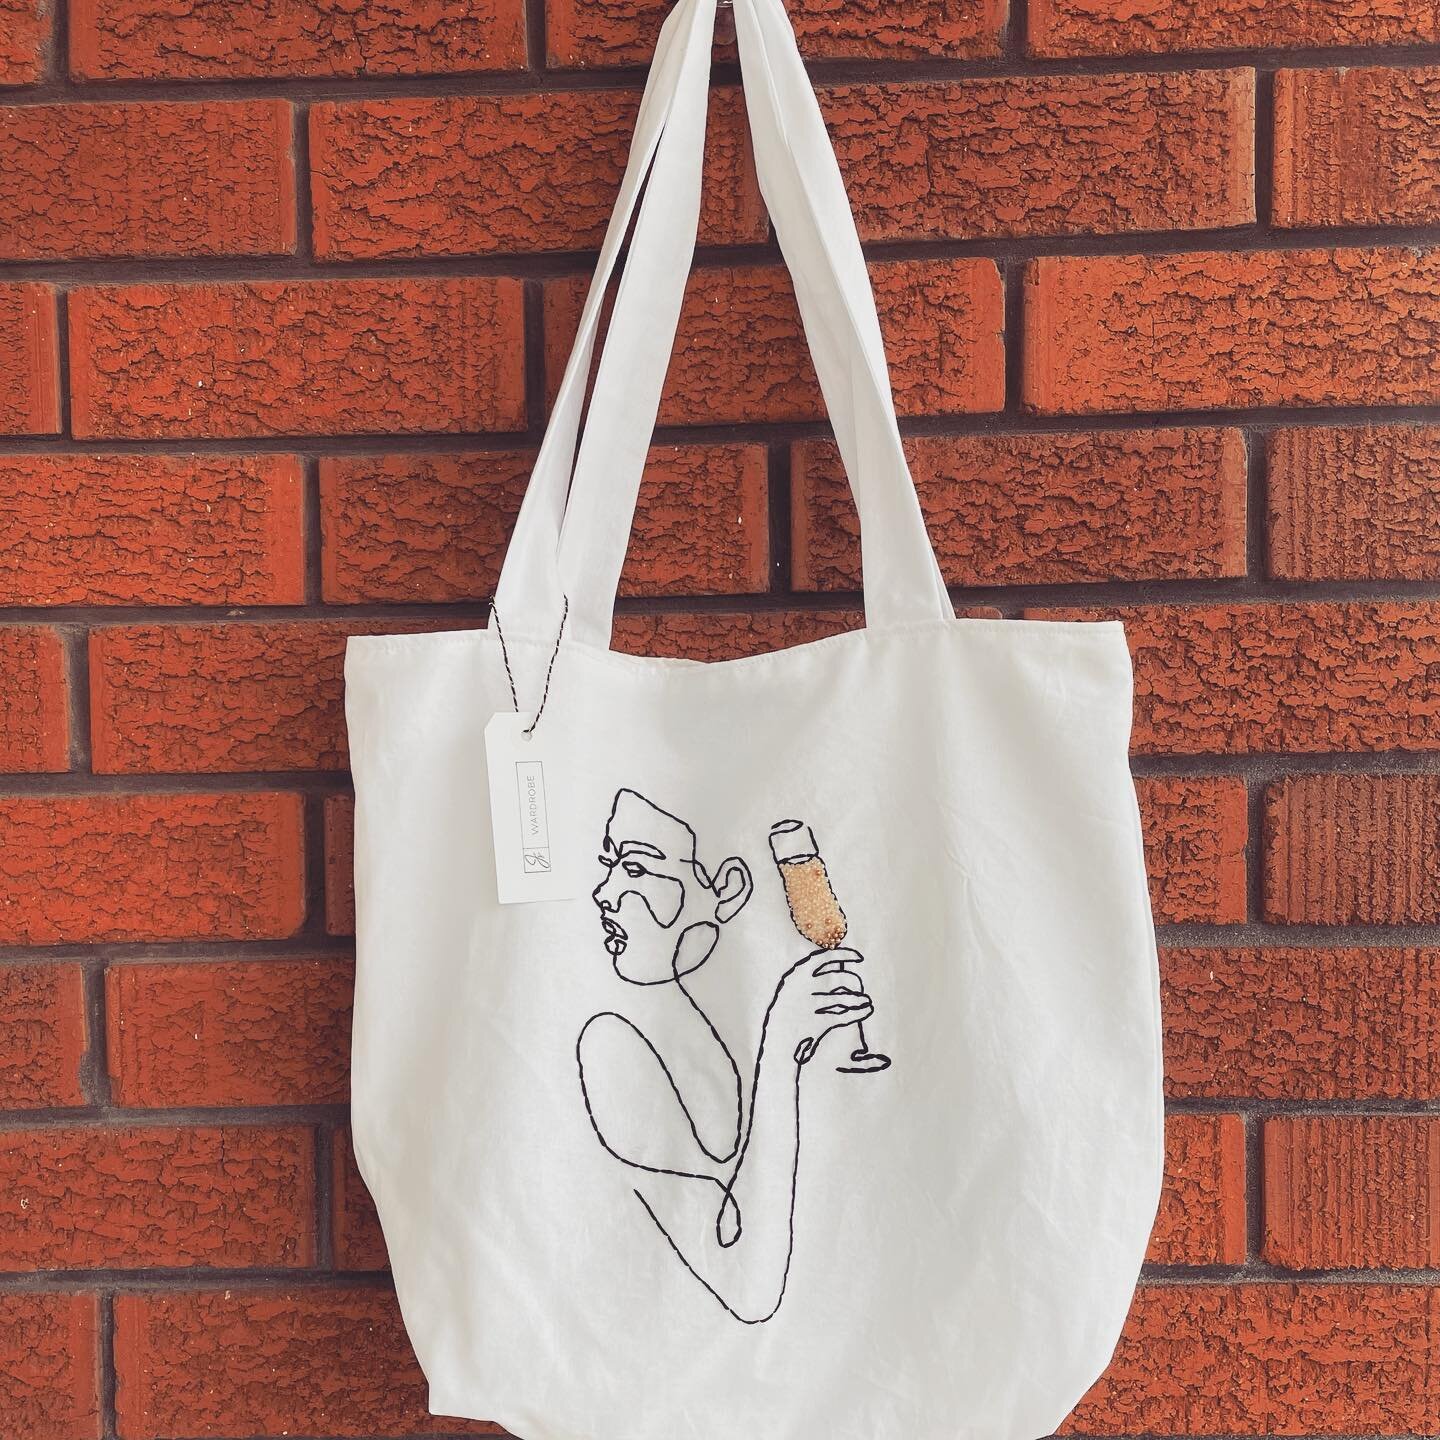 &ldquo;Too much of anything is bad, but too much Champagne is just right.&rdquo; 
- Mark Twain 
(LINK IN BIO)
.
.
.
.
.
#totebag #totebags #tote #totebagstyle #painted #bead #beads #beadwork #beadembroidery #handmade #handpainted #handembroidery #sma